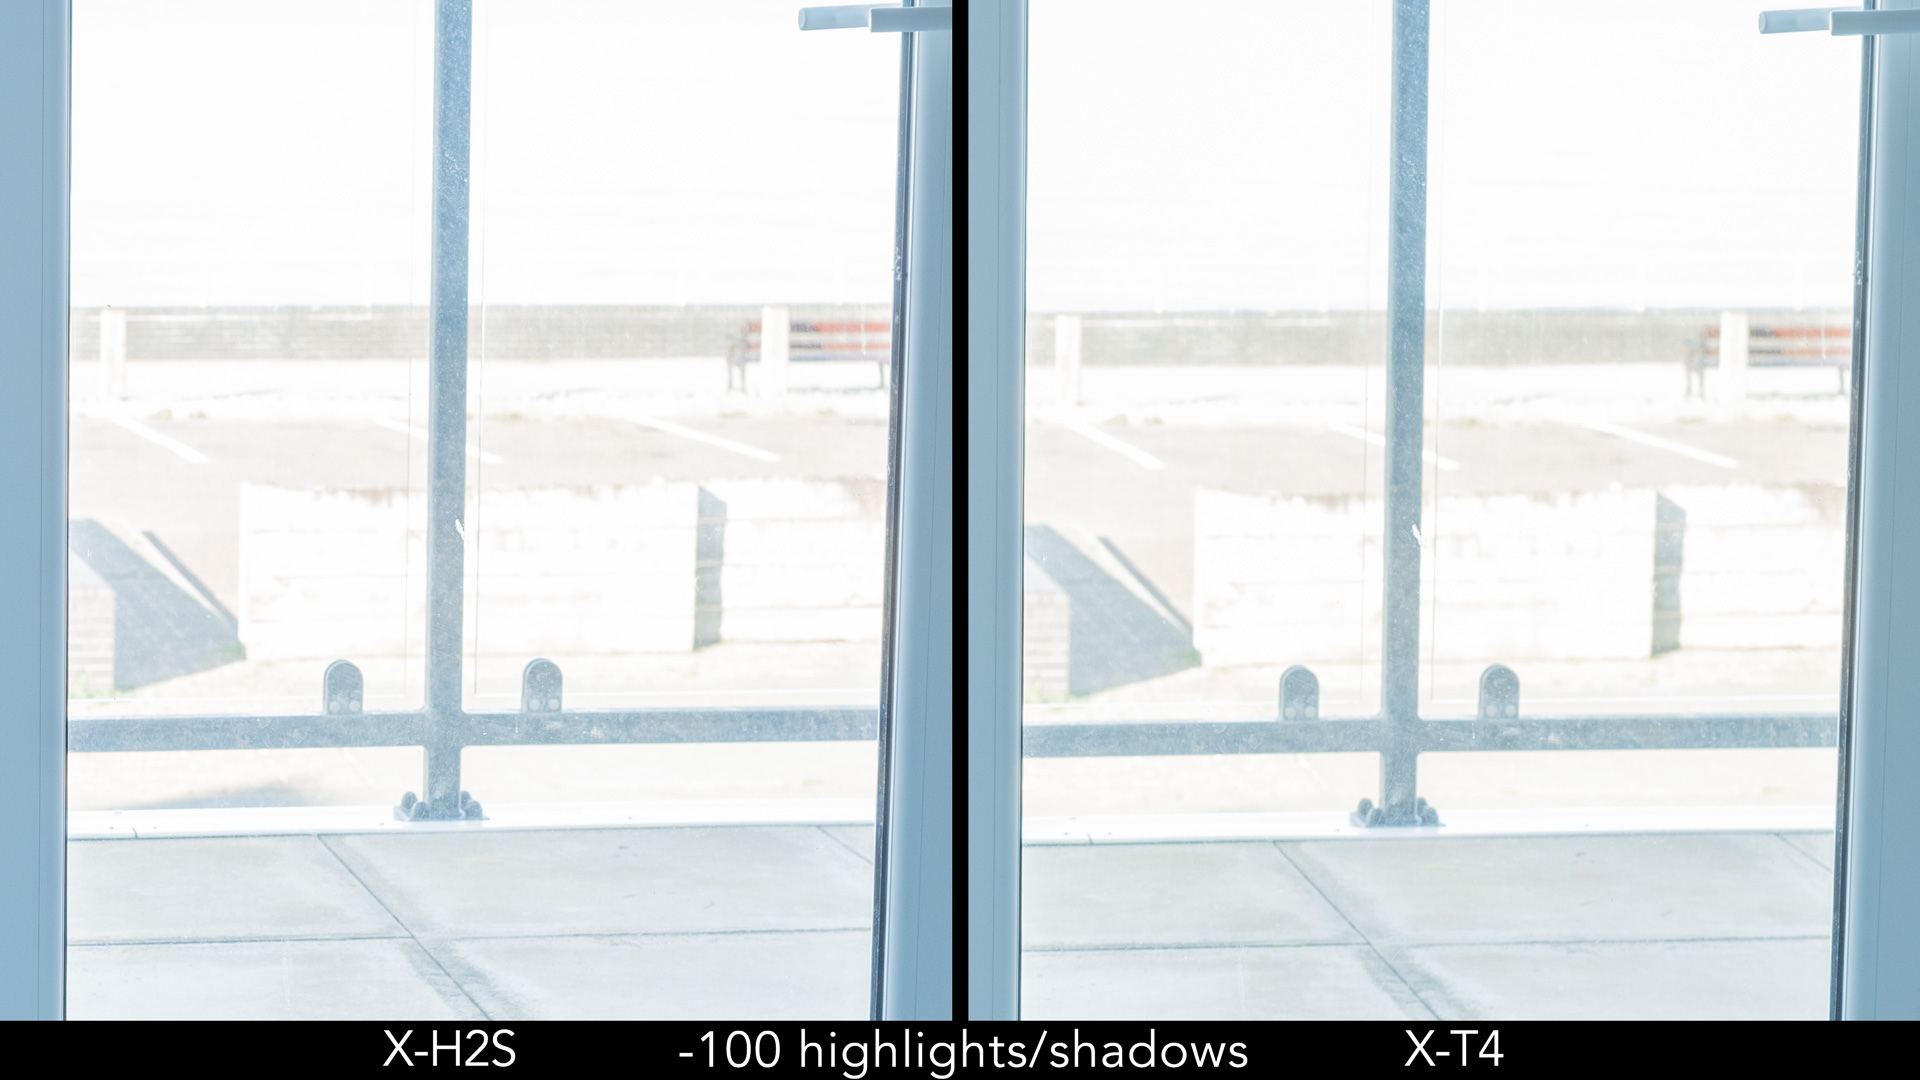 Side by side crop showing recovered details in the highlights for the X-H2S and X-T4.